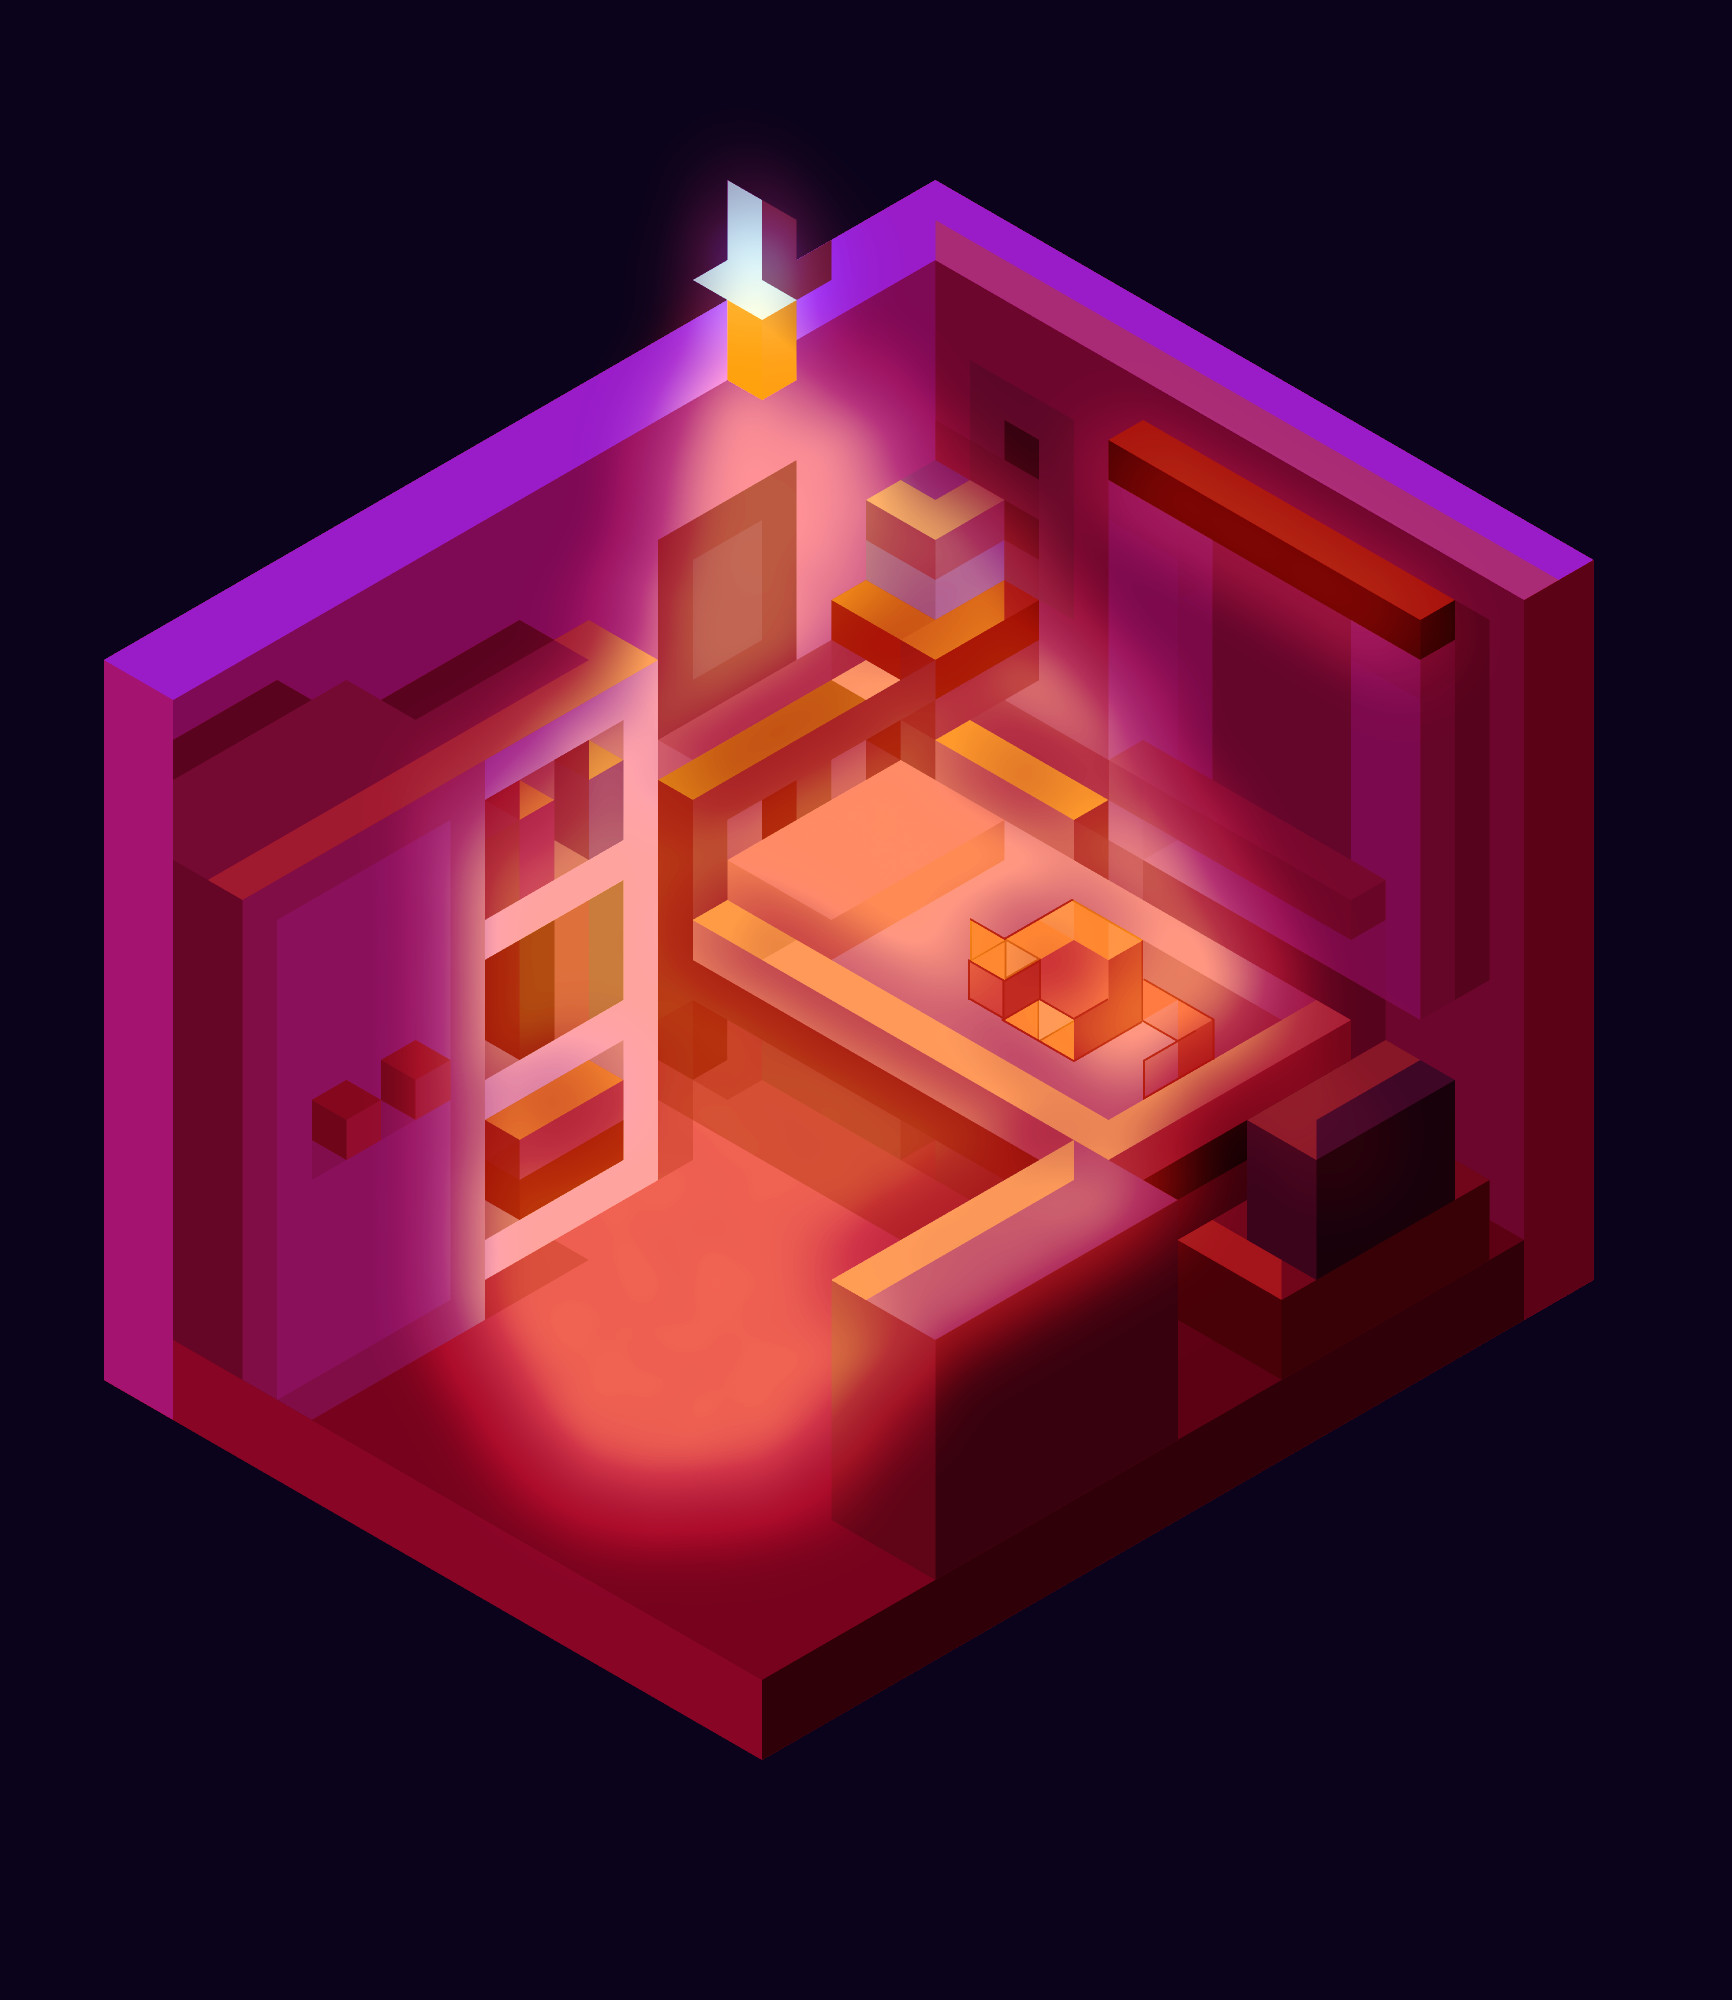 Pixel Art Bedroom Interior Projects Peace Amongst Chaos - Reverasite